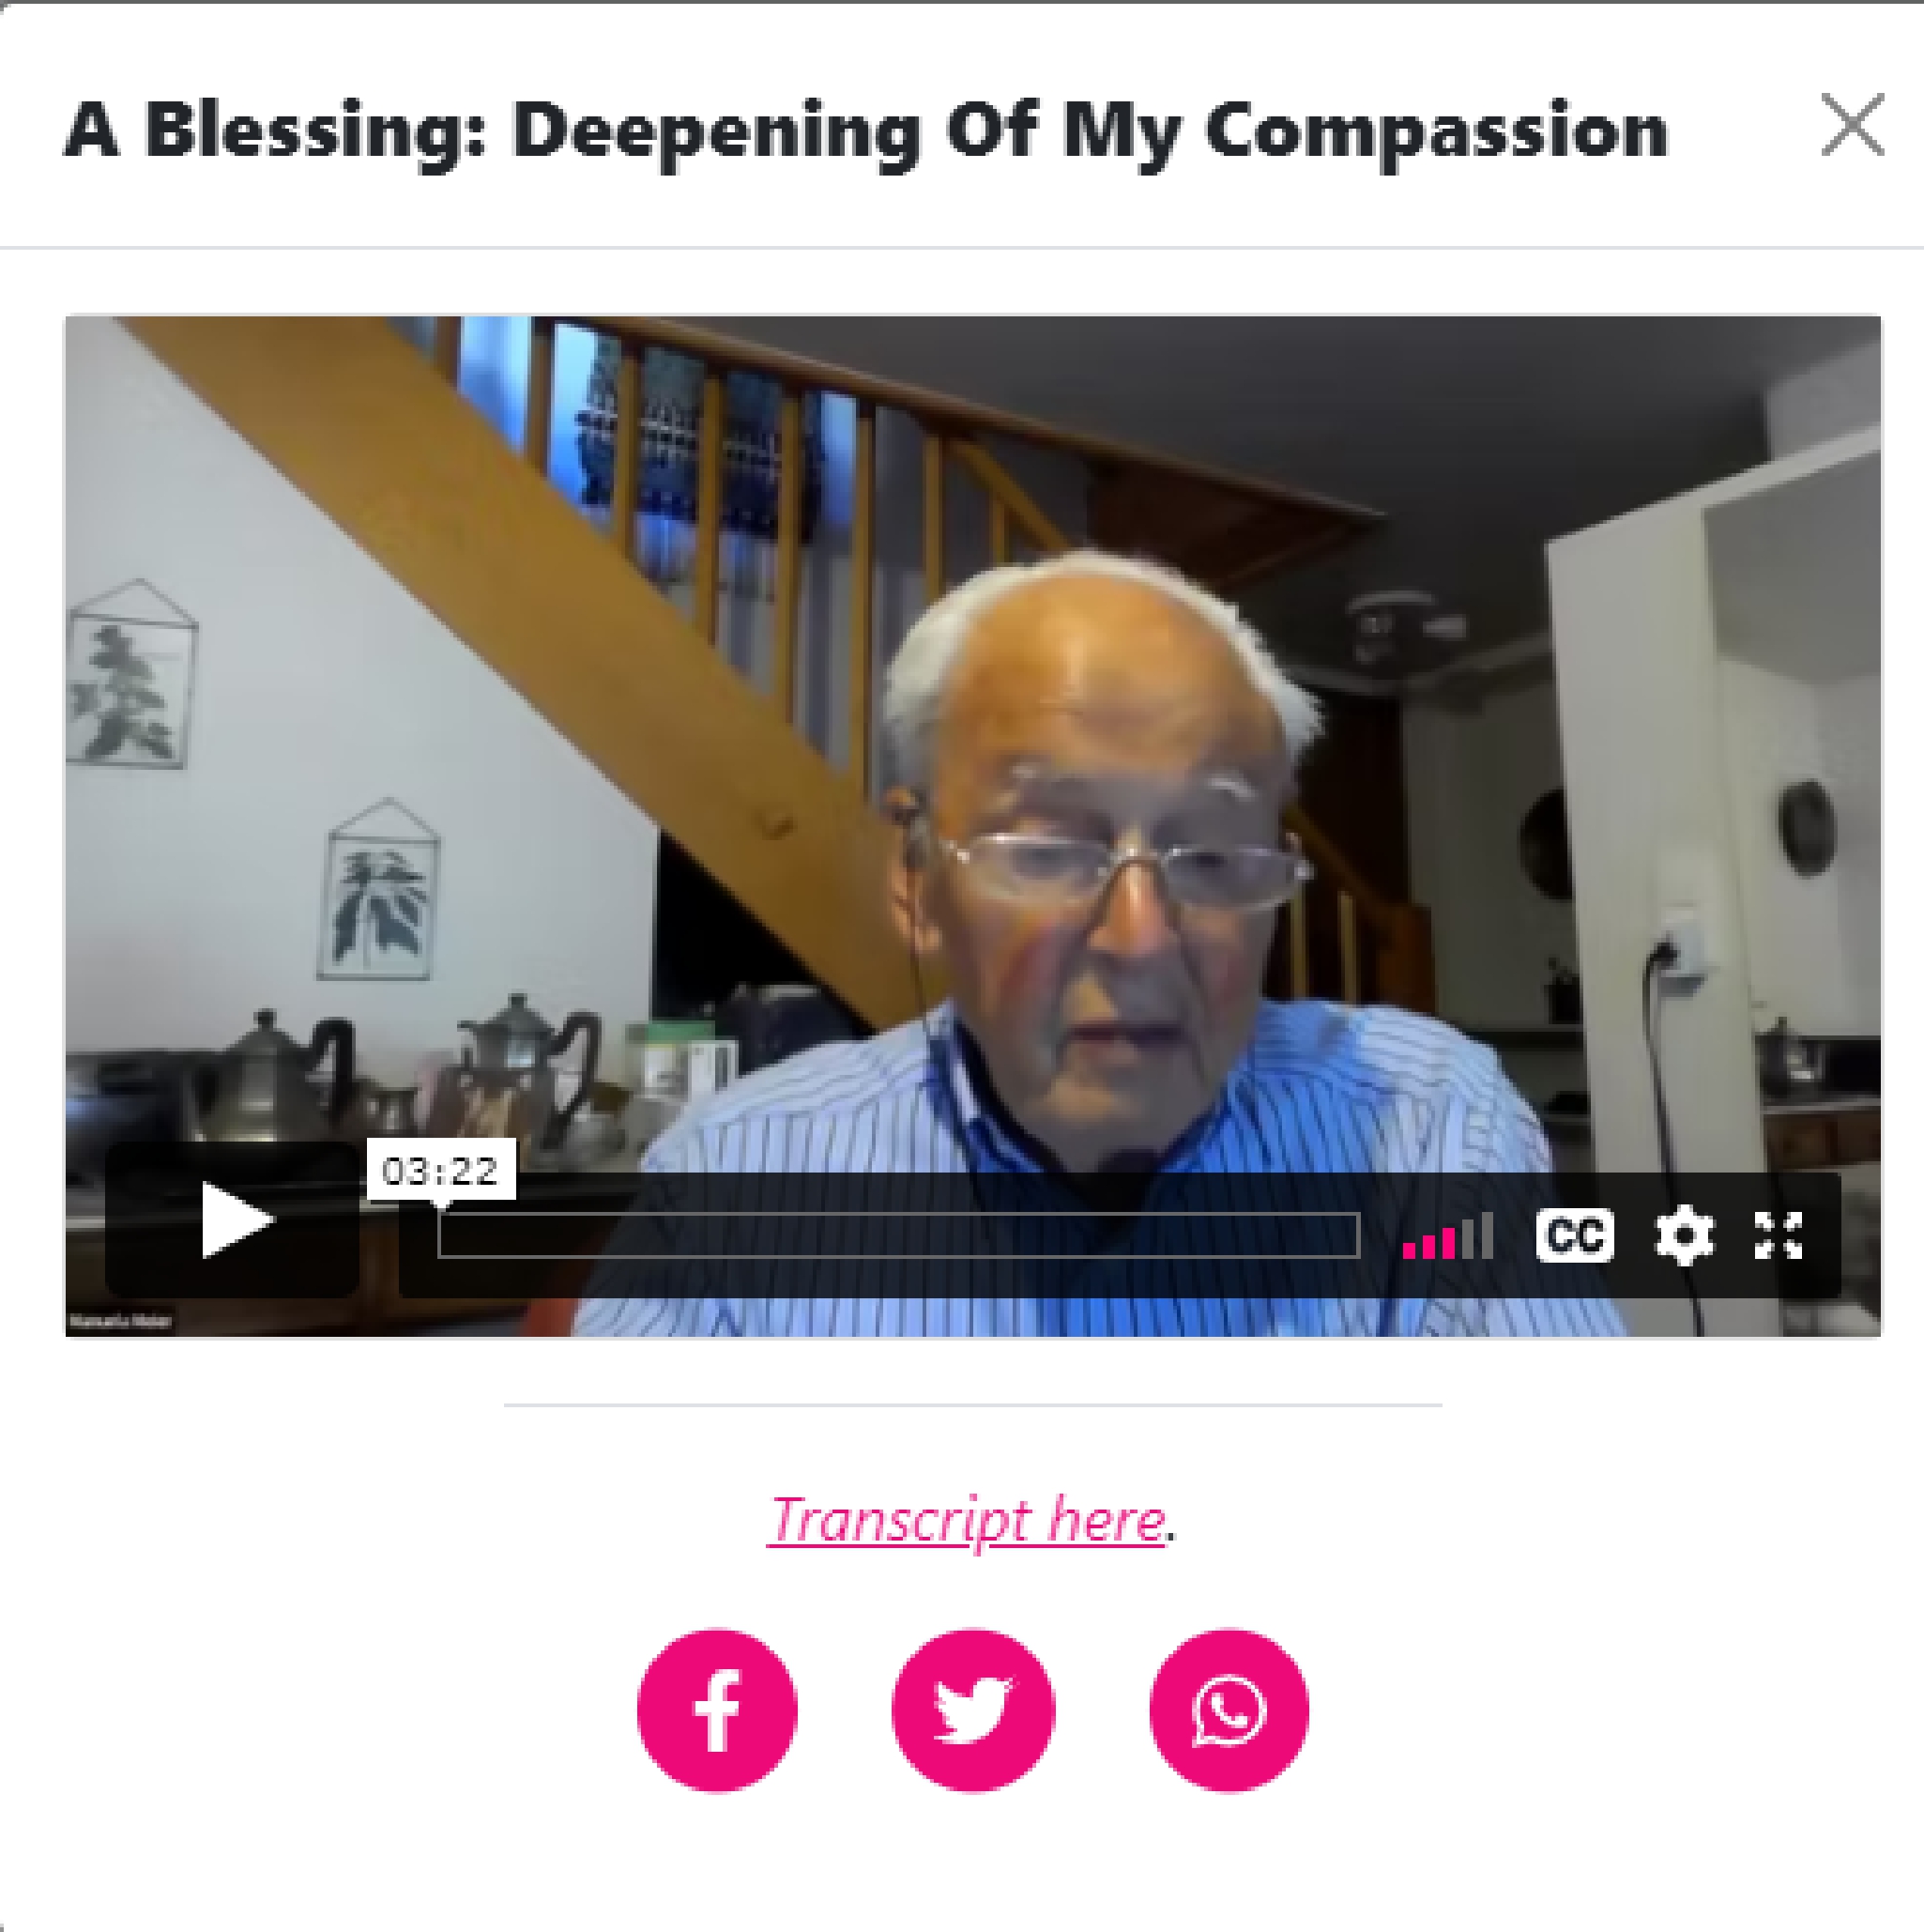 A Blessing: Deepening Of My Compassion